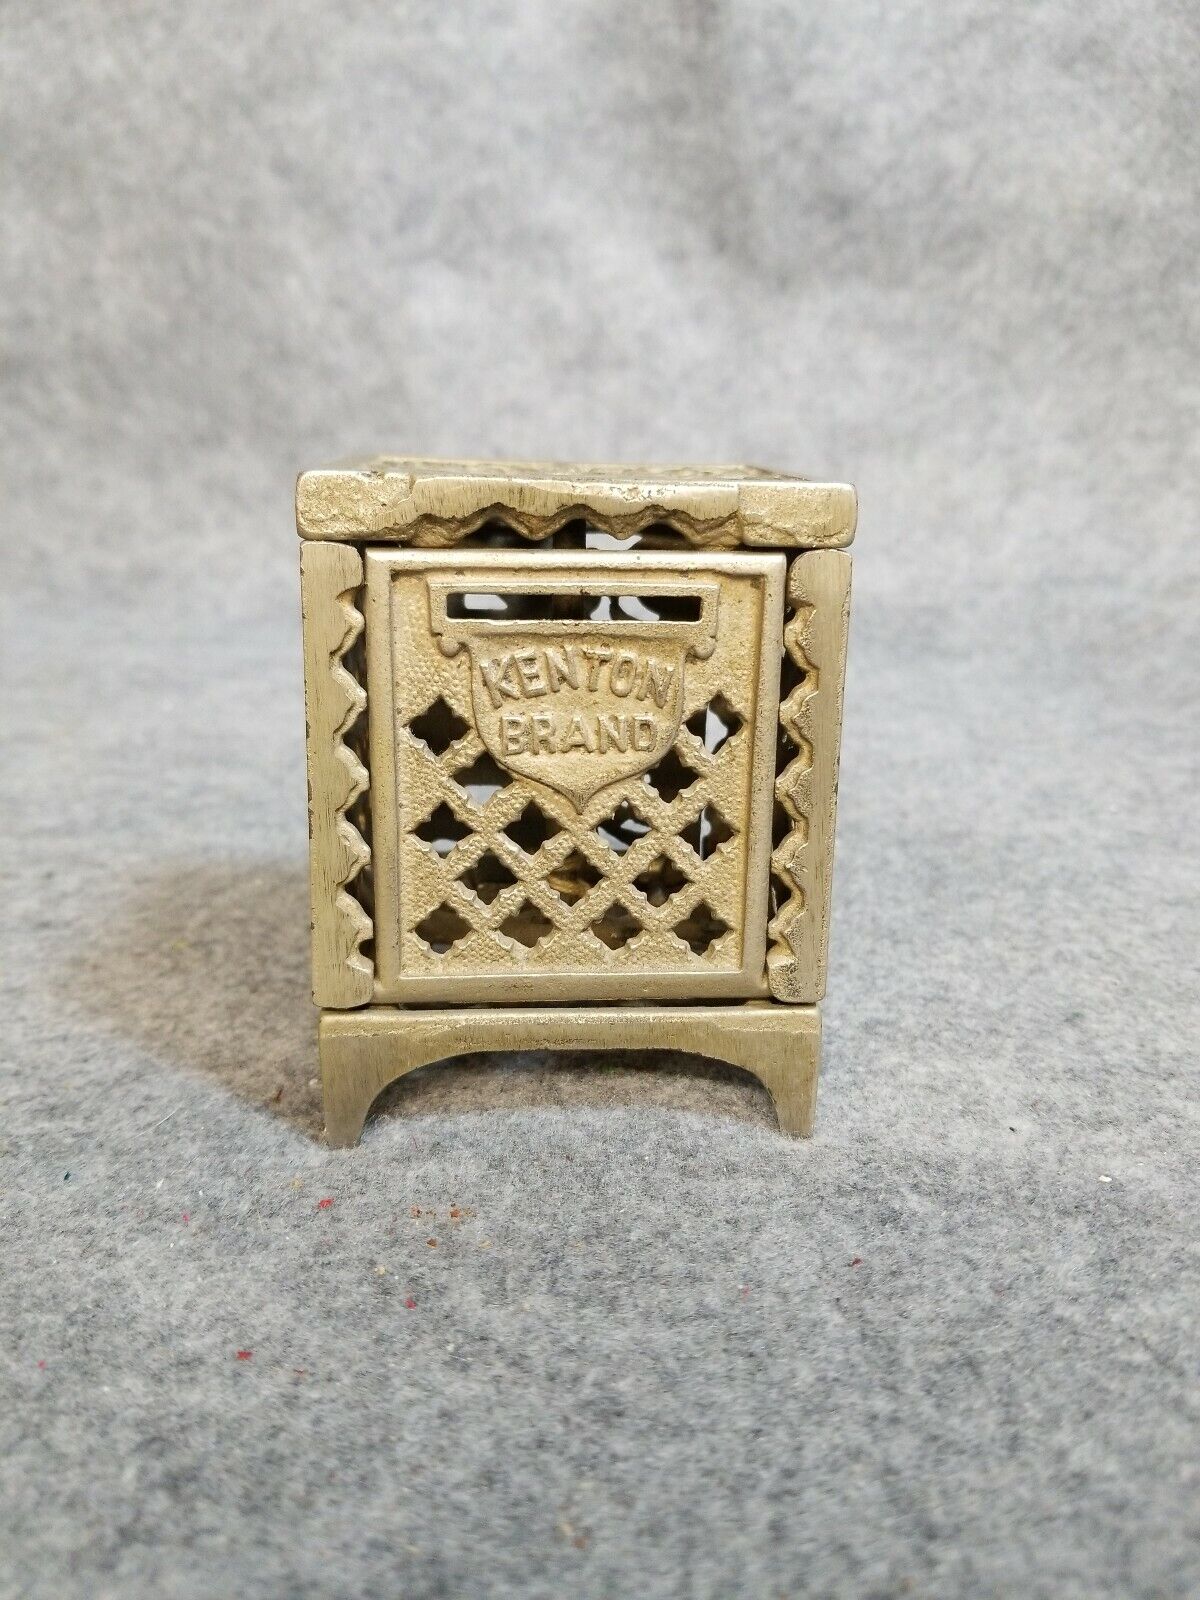 Kenton Brand Metal Penny Bank, little over 3 1/2 inches tall.